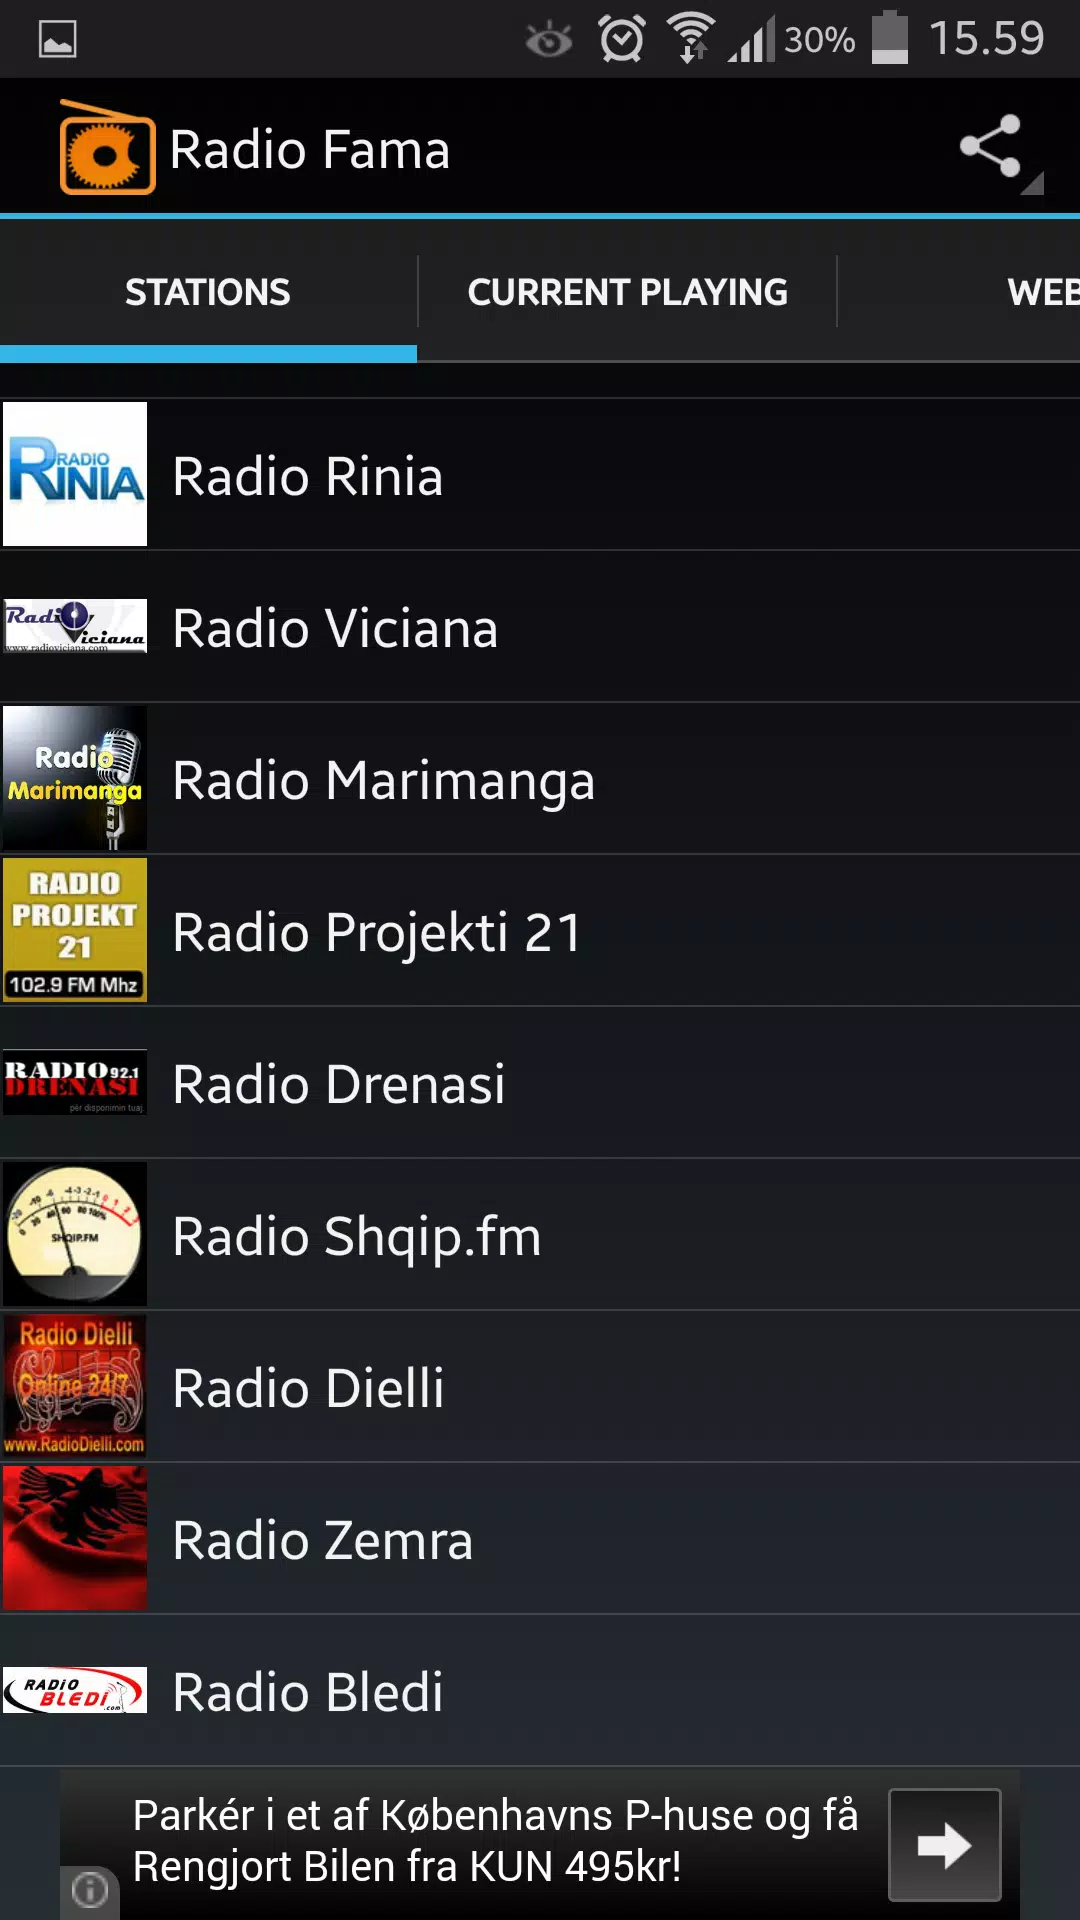 Radio Shqip APK for Android Download